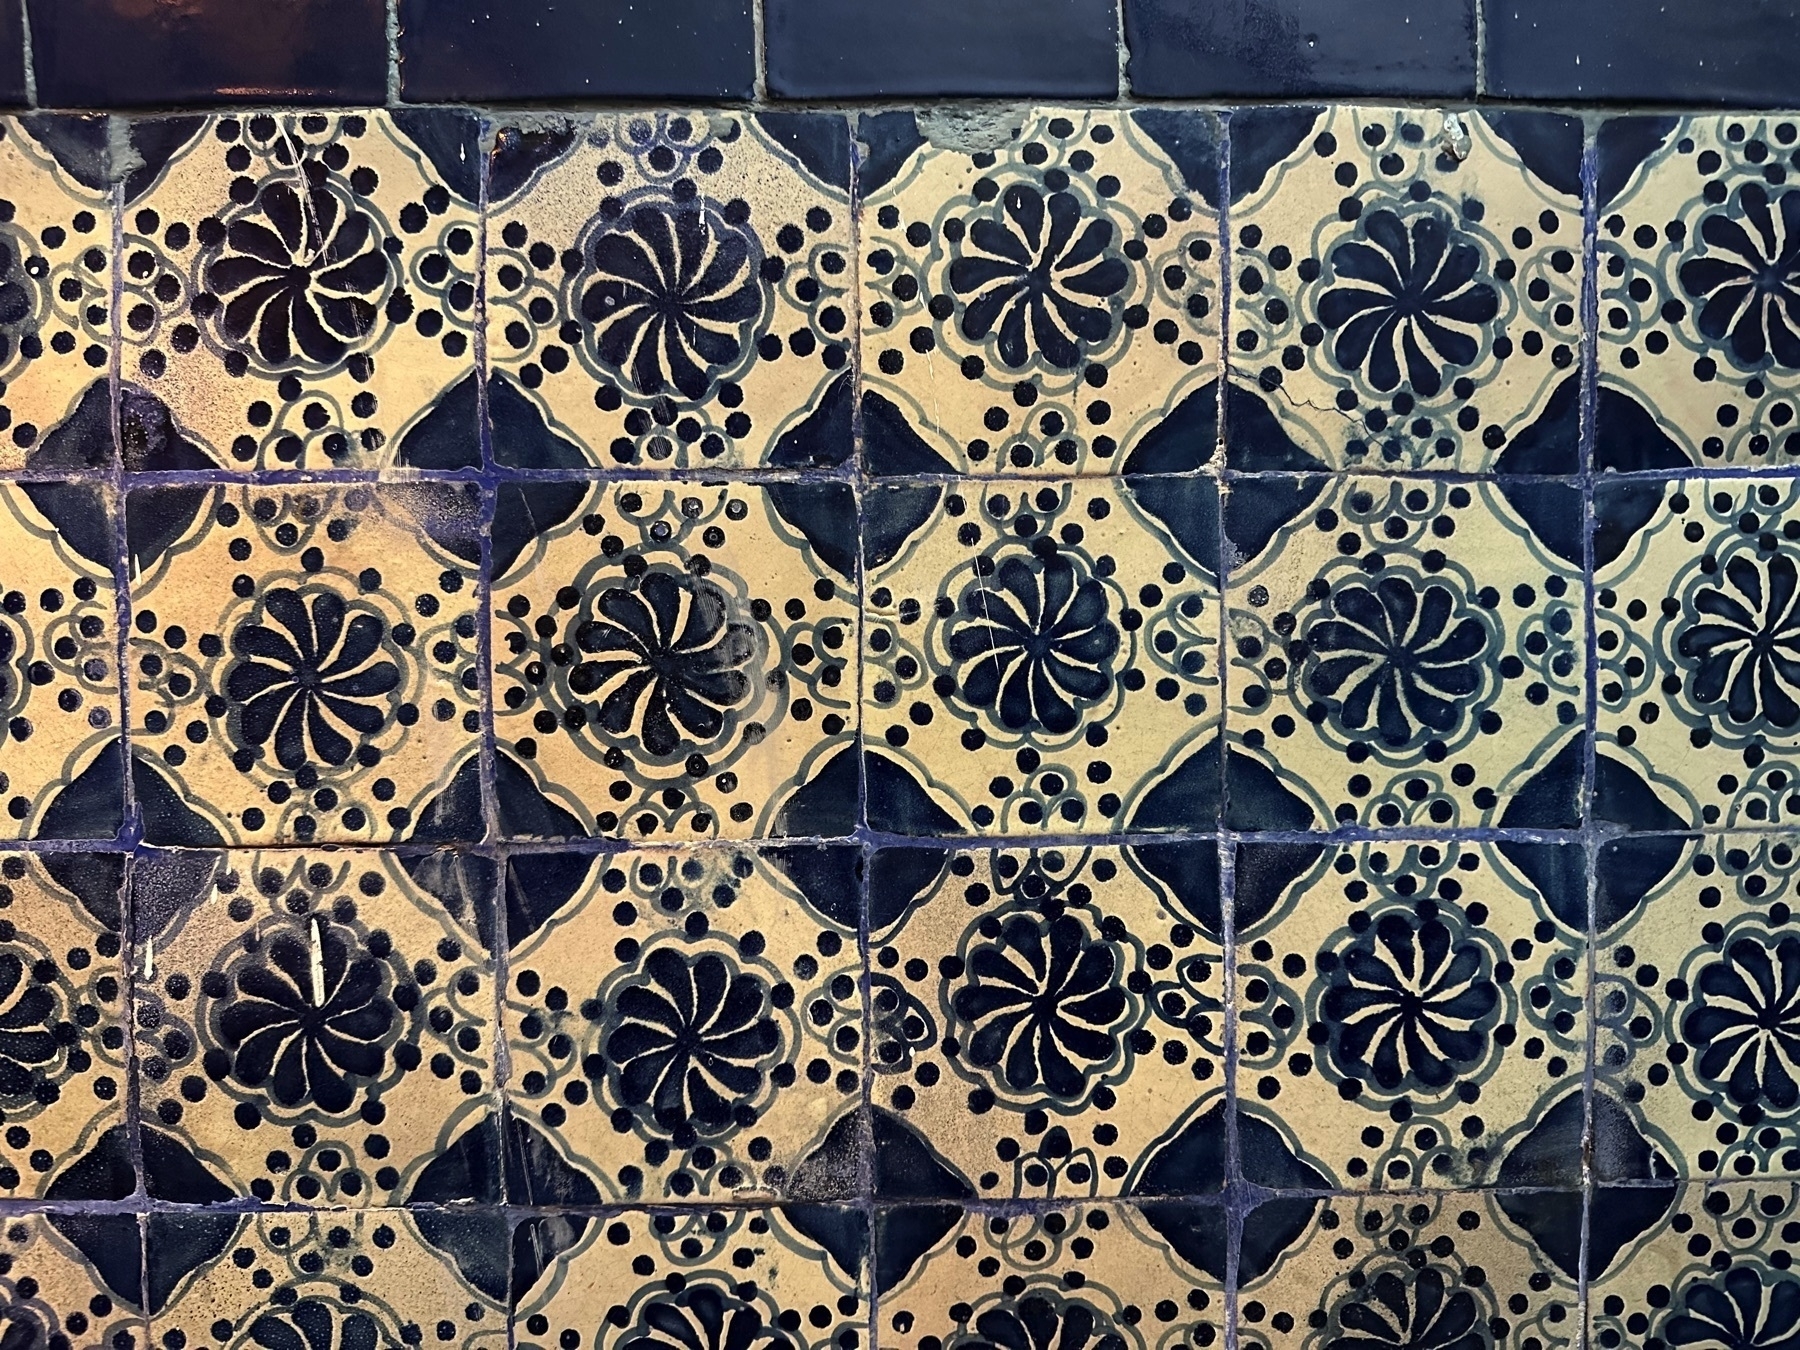 White and blue tile work